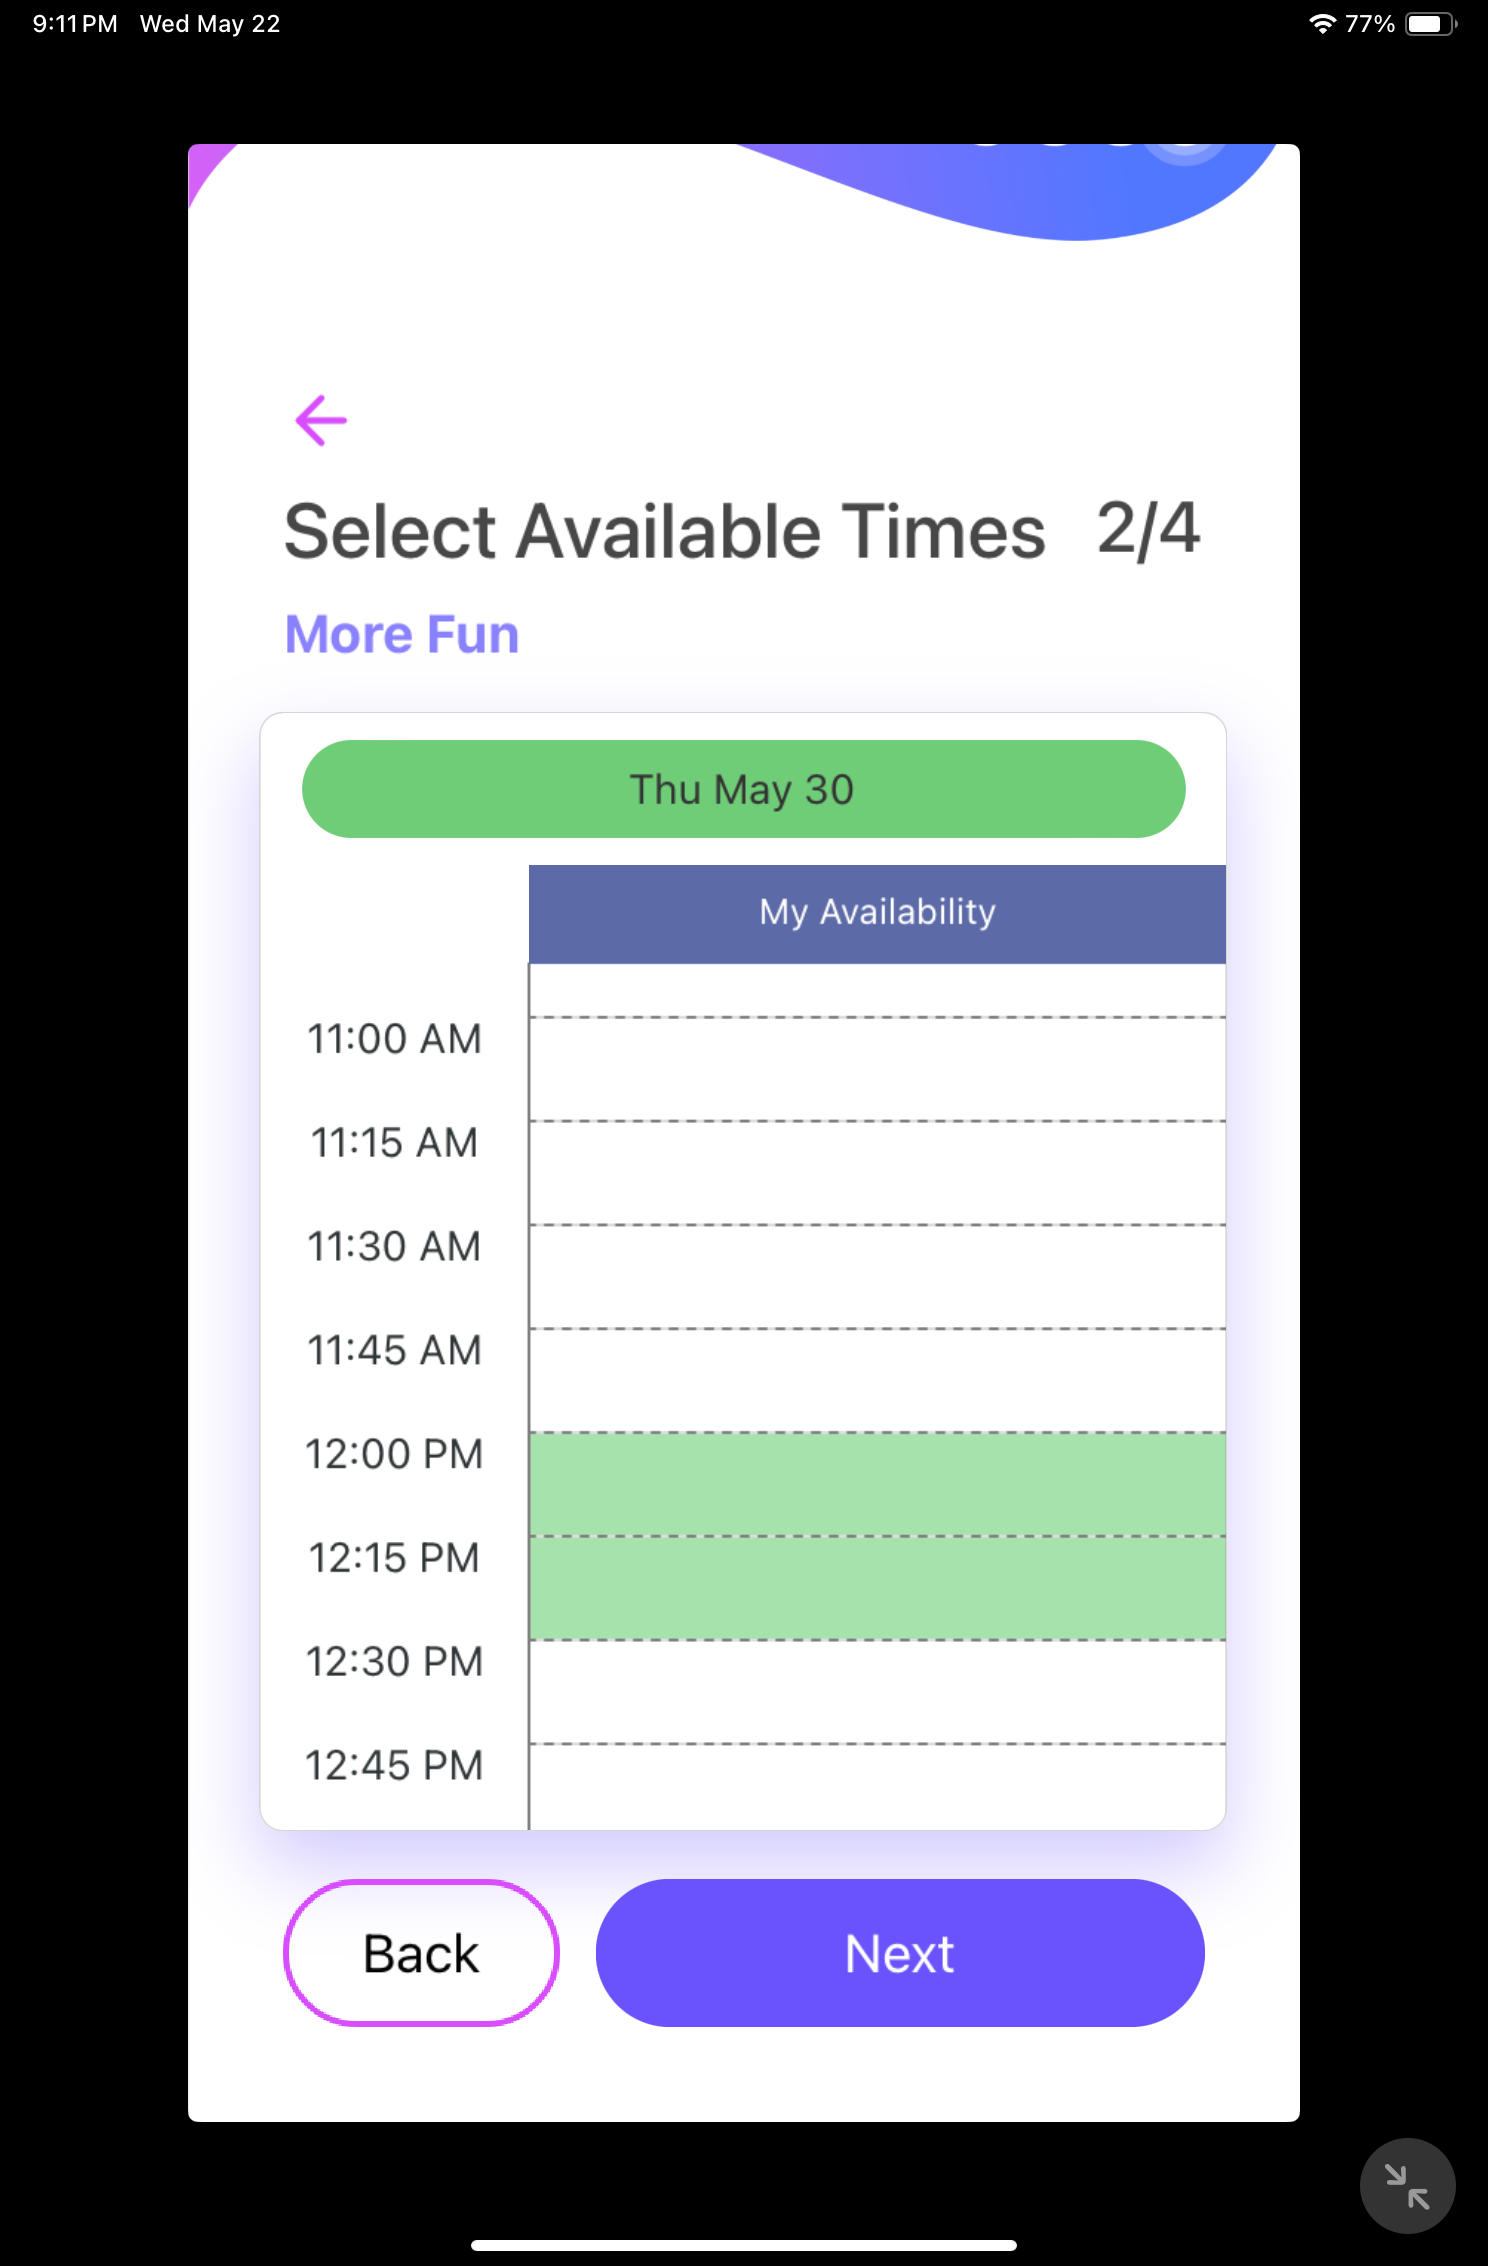 App Review | Eco-App | Schedule Meeting | iPhone/iPad | GiveMeApps